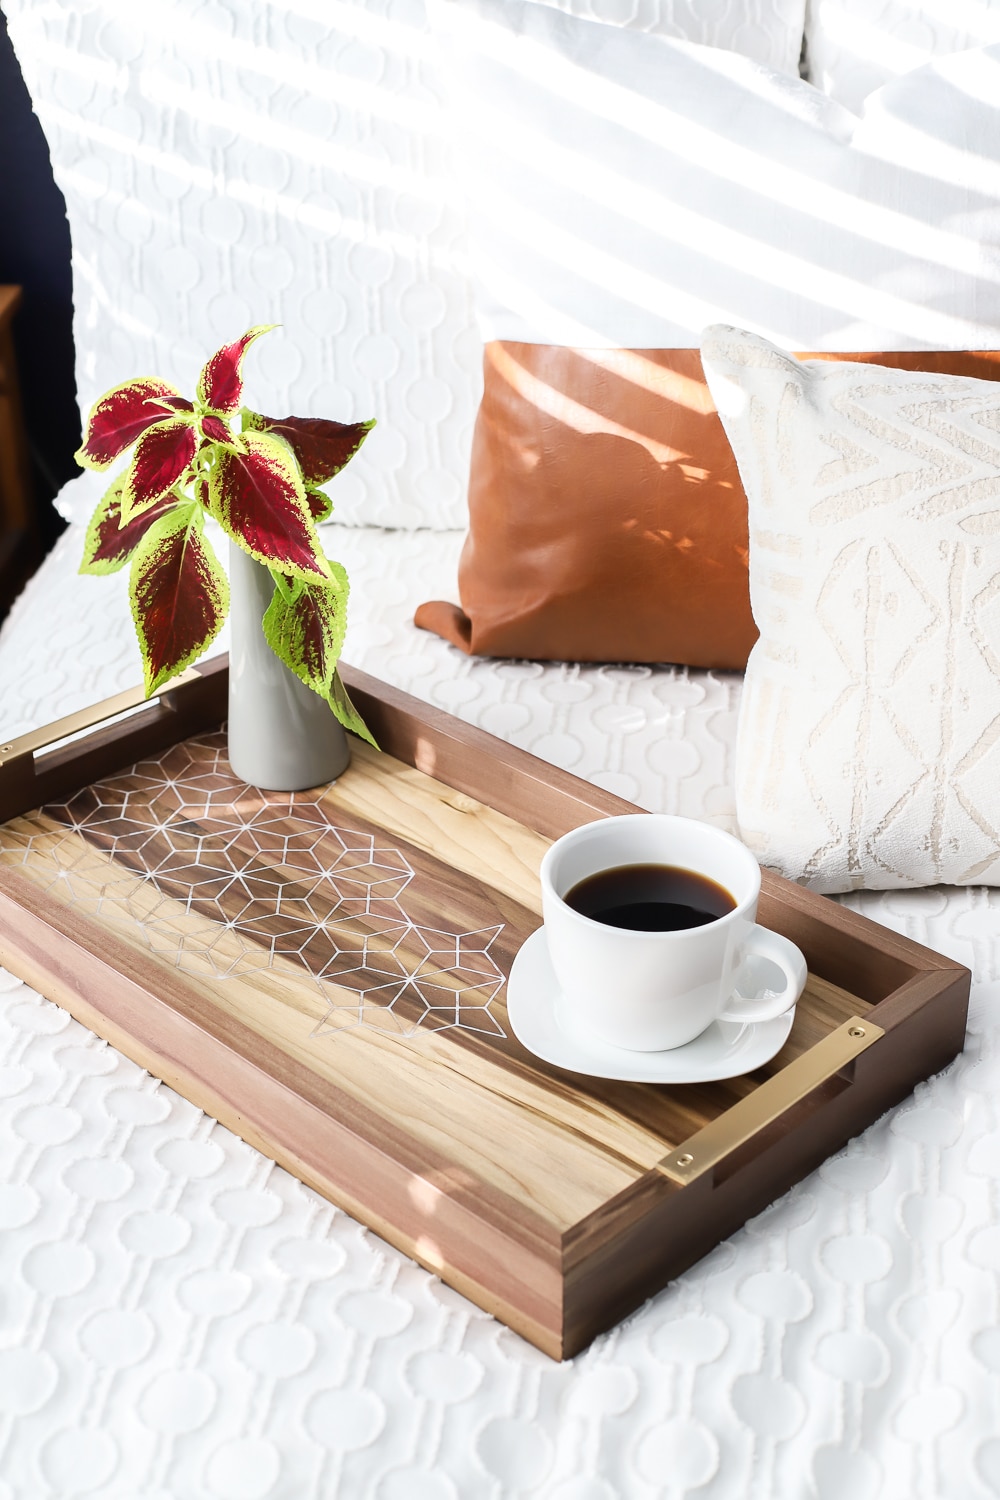 How to make a DIY wood and resin inlay coffee tray